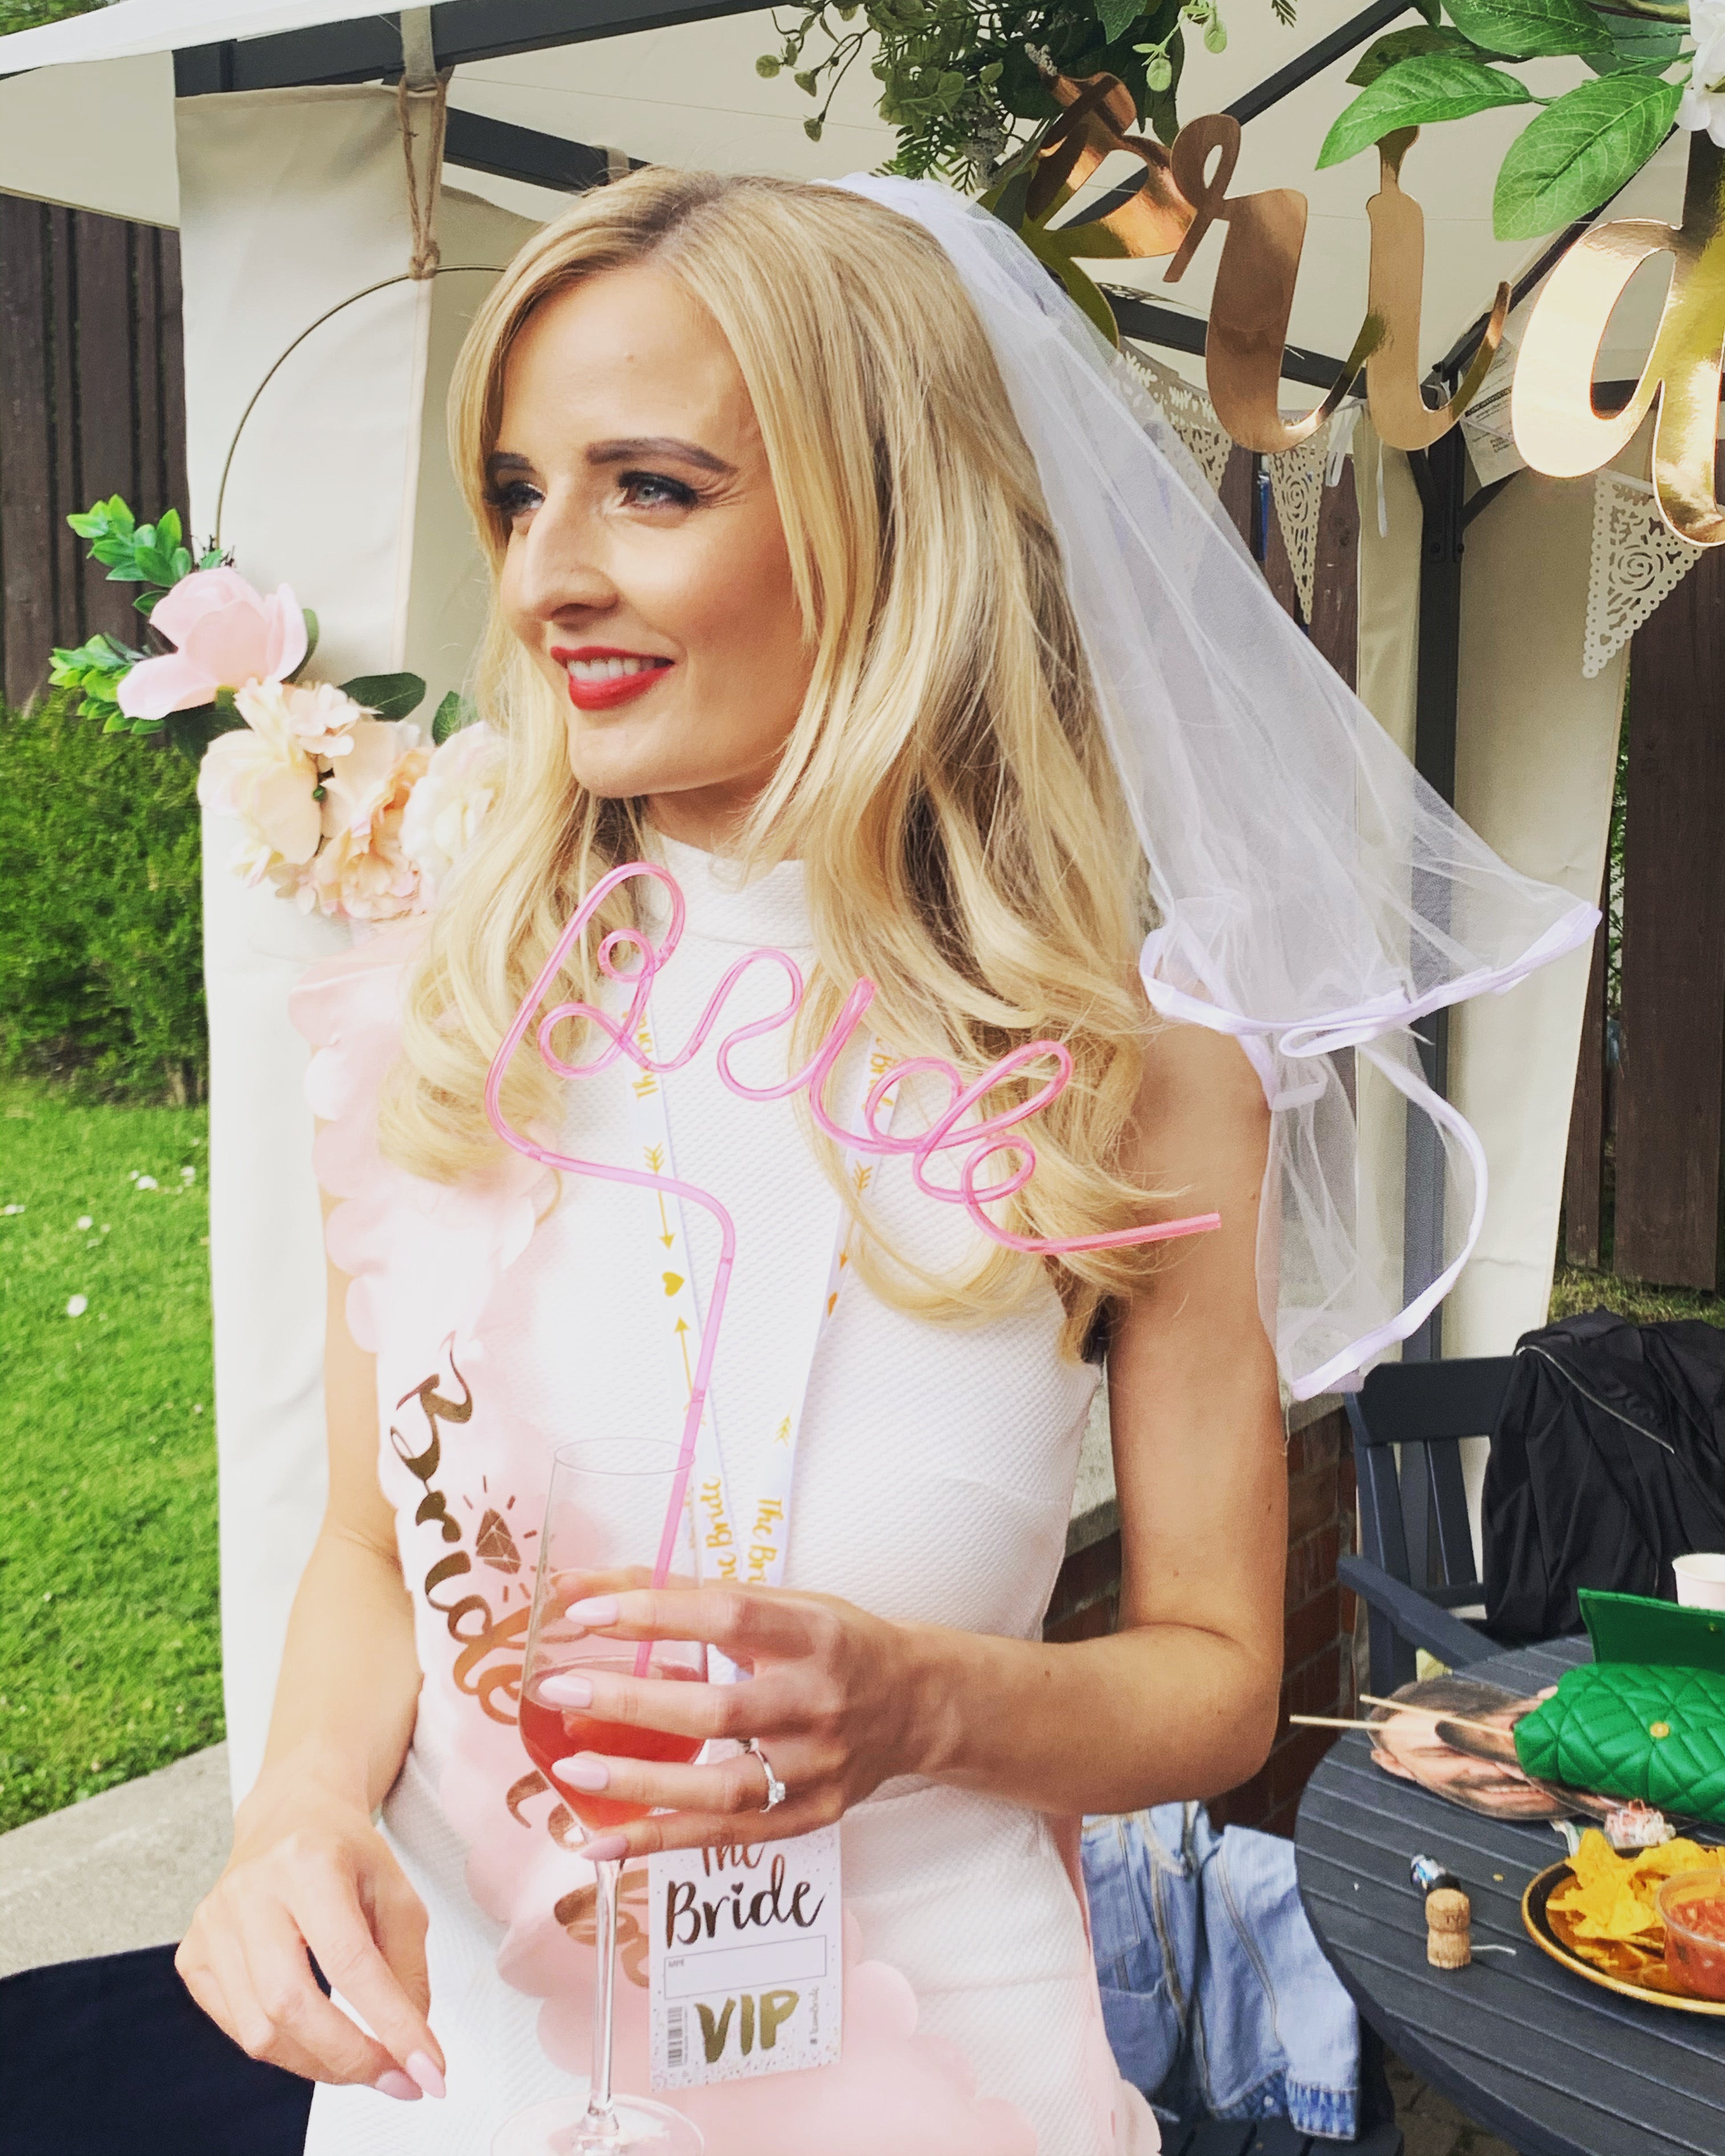 Bride-to-be-hen-party-straw